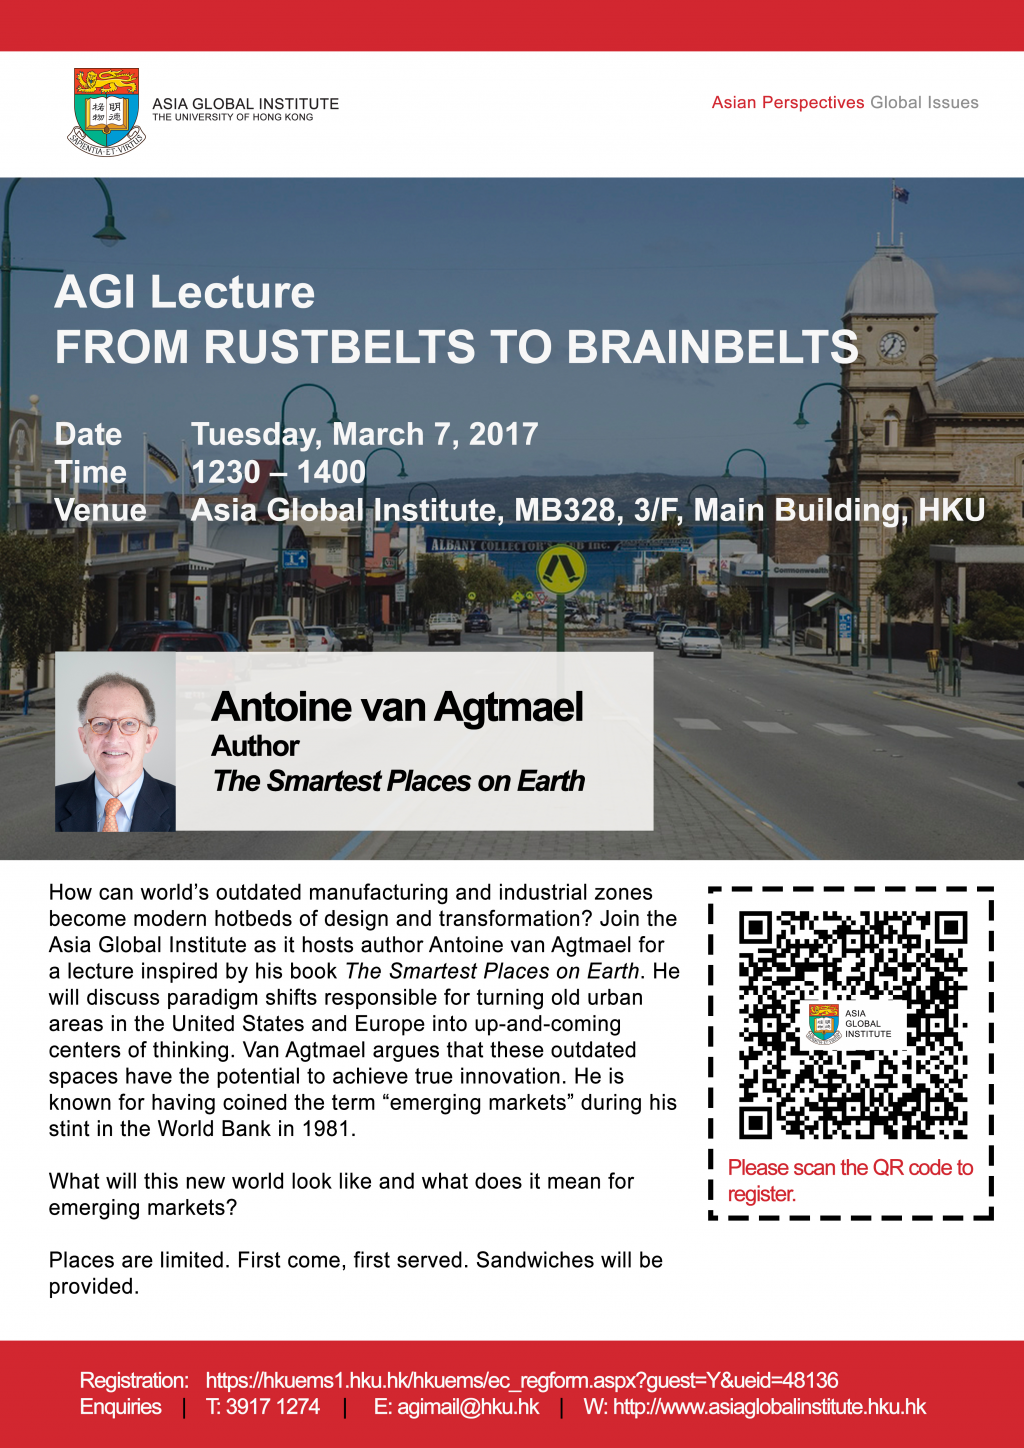 AGI Lecture: From Rustbelts to Brainbelts